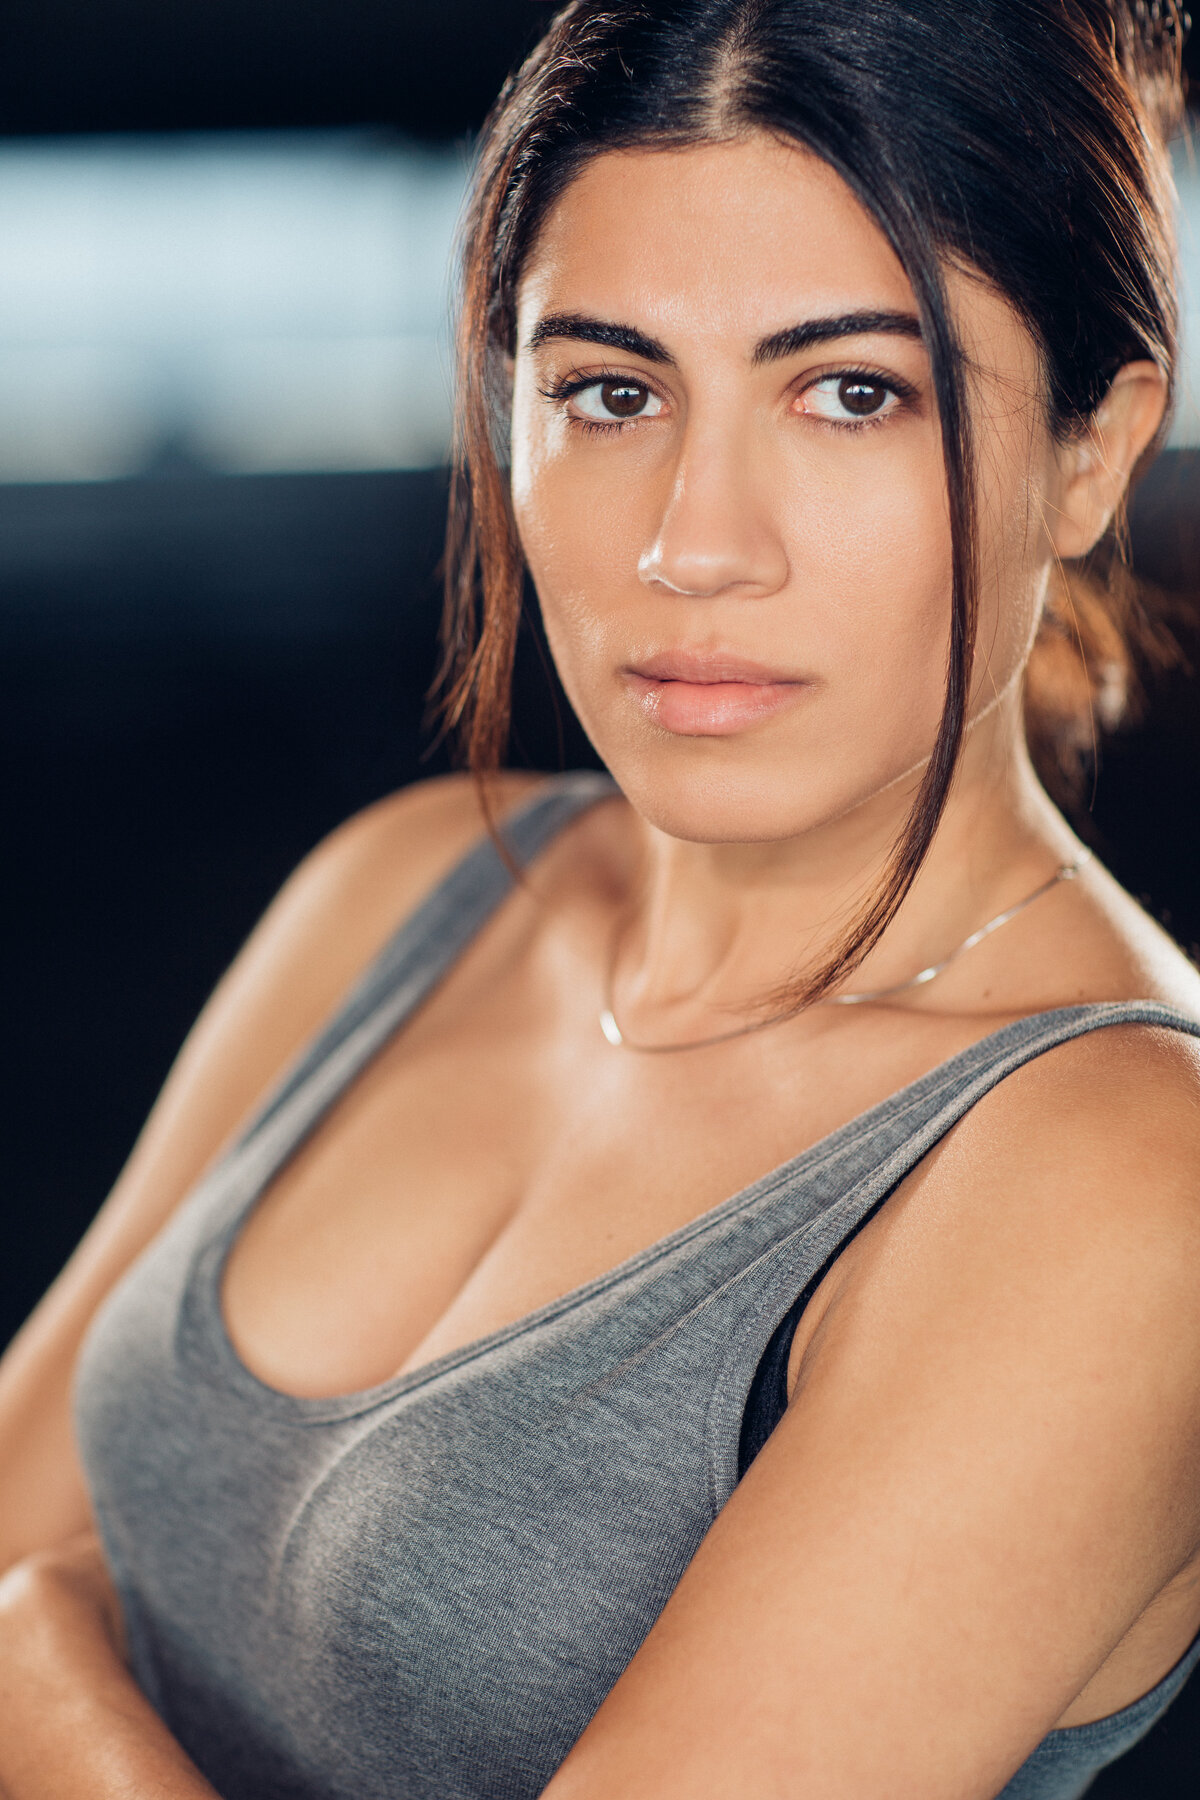 Headshot Photograph Of Young Woman In Gray Tank Top Los Angeles